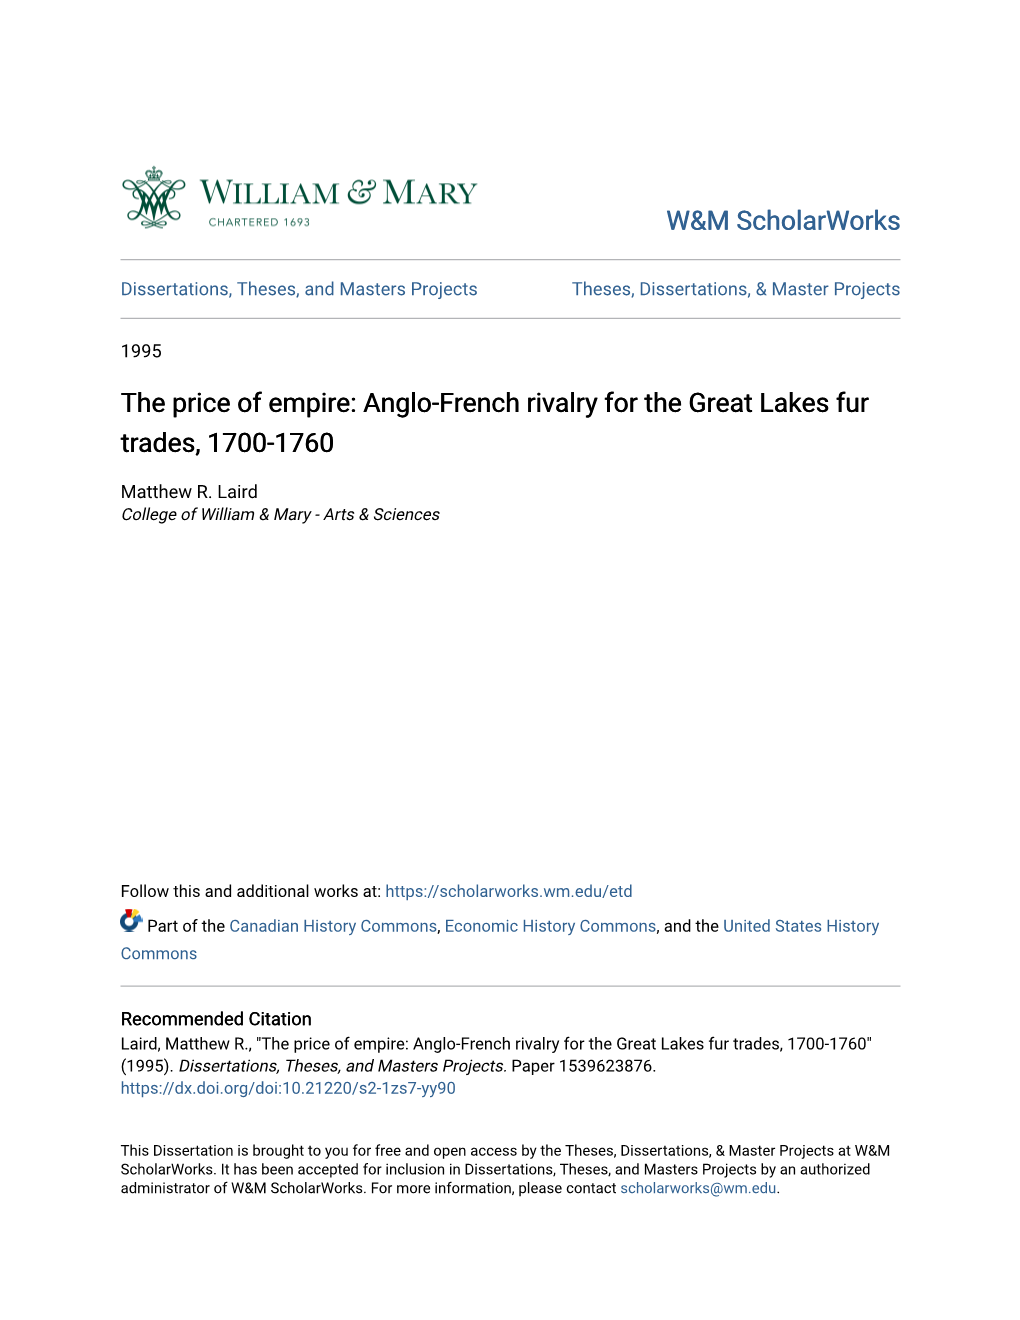 Anglo-French Rivalry for the Great Lakes Fur Trades, 1700-1760